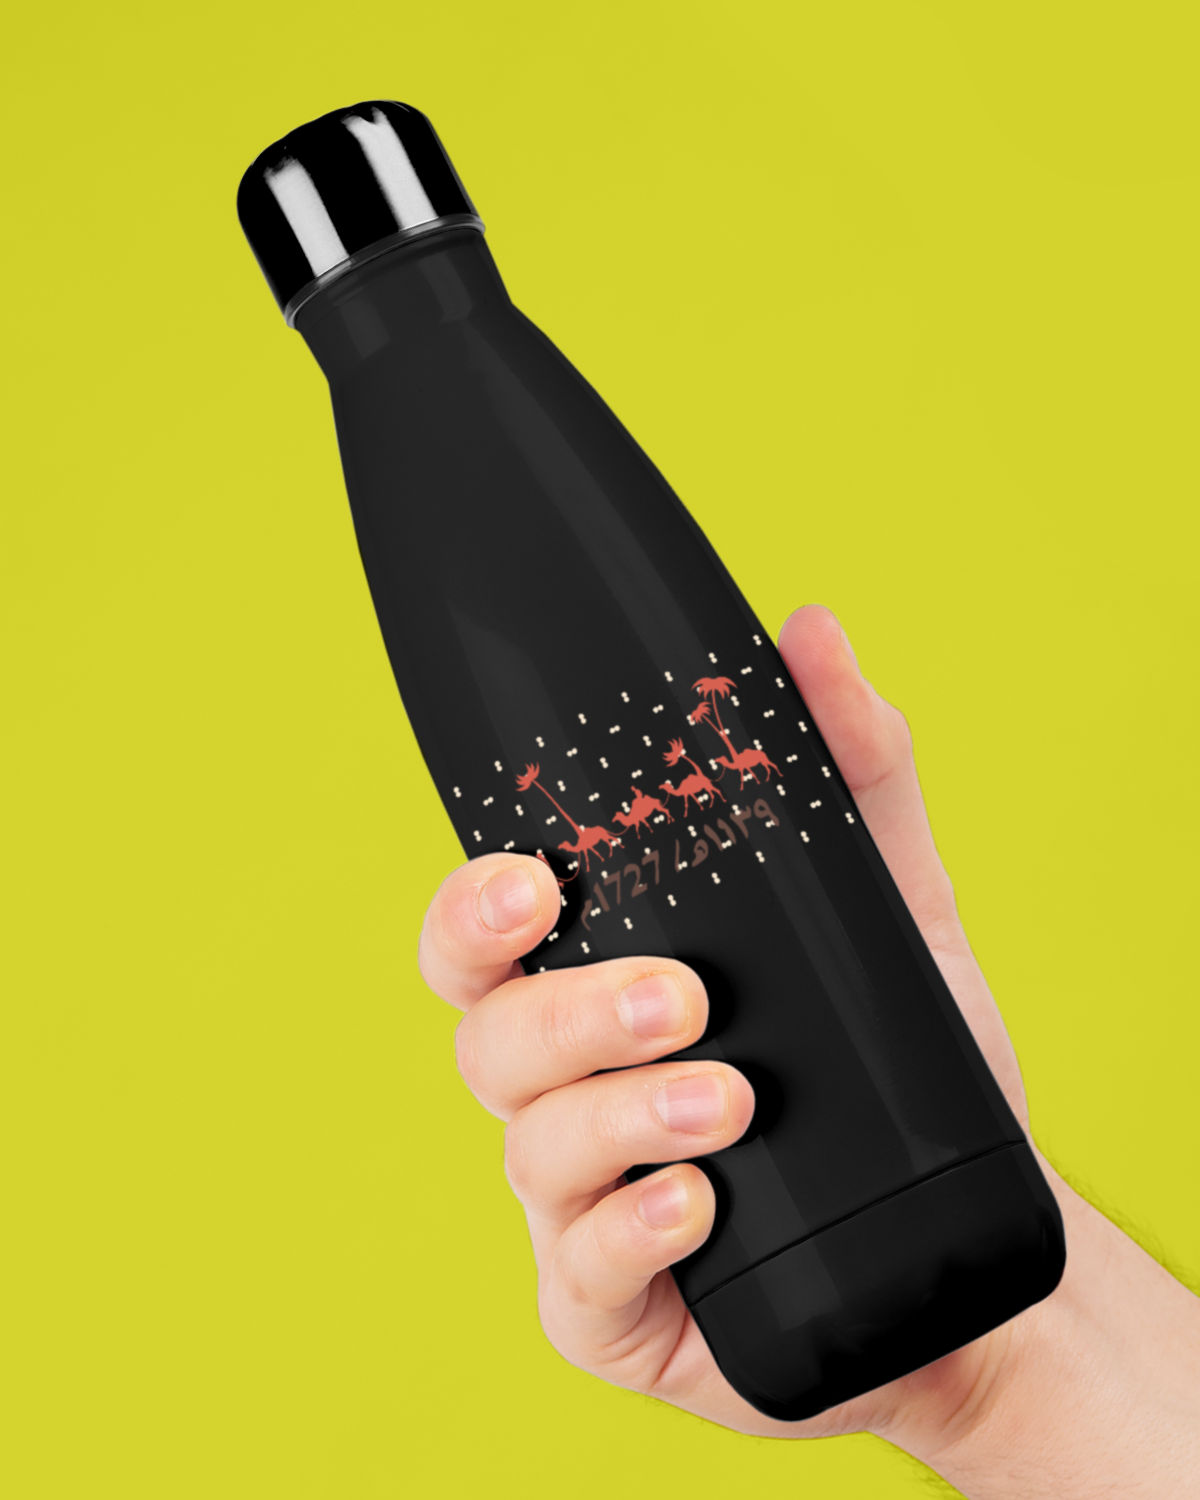 Foundation Day Insulated Bottle (1139 AH/1727 AD)